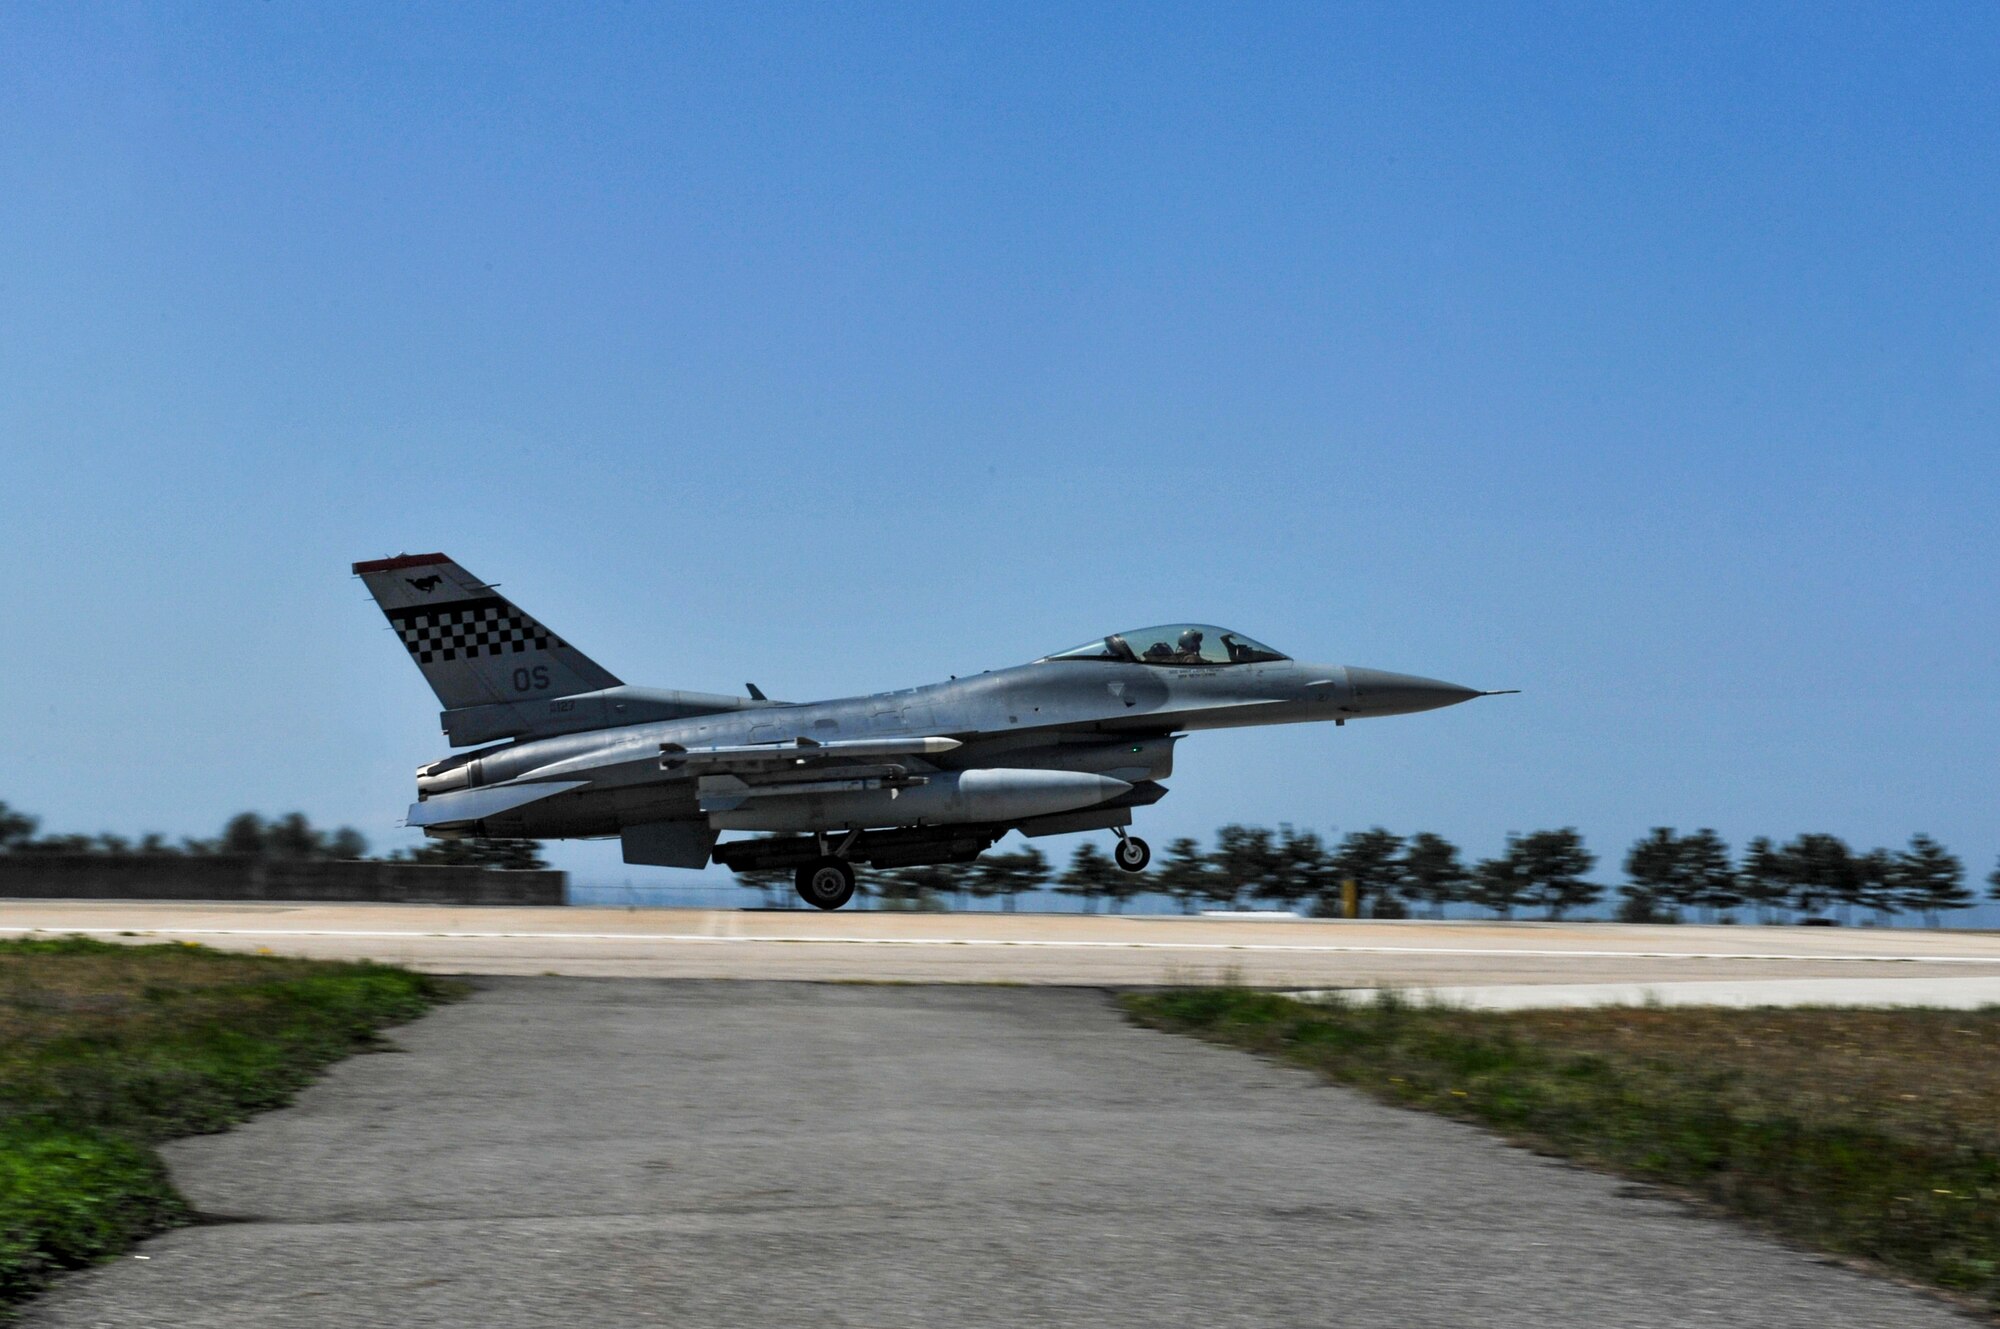 A U.S. Air Force F-16 Fighting Falcon from the 36th Fighter Squadron, Osan Air Base, Republic of Korea, takes off during Exercise MAX THUNDER 17 at Kunsan Air Base, Republic of Korea, April 27, 2017. In Max Thunder, U.S. and ROK air forces consistently train together to be ready around-the-clock to defend the Republic of Korea. The interoperability and trust developed between the allies in training is critical to ensure U.S. and ROK are prepared for any challenge. (U.S. Air Force photo by Senior Airman Colville McFee/Released)